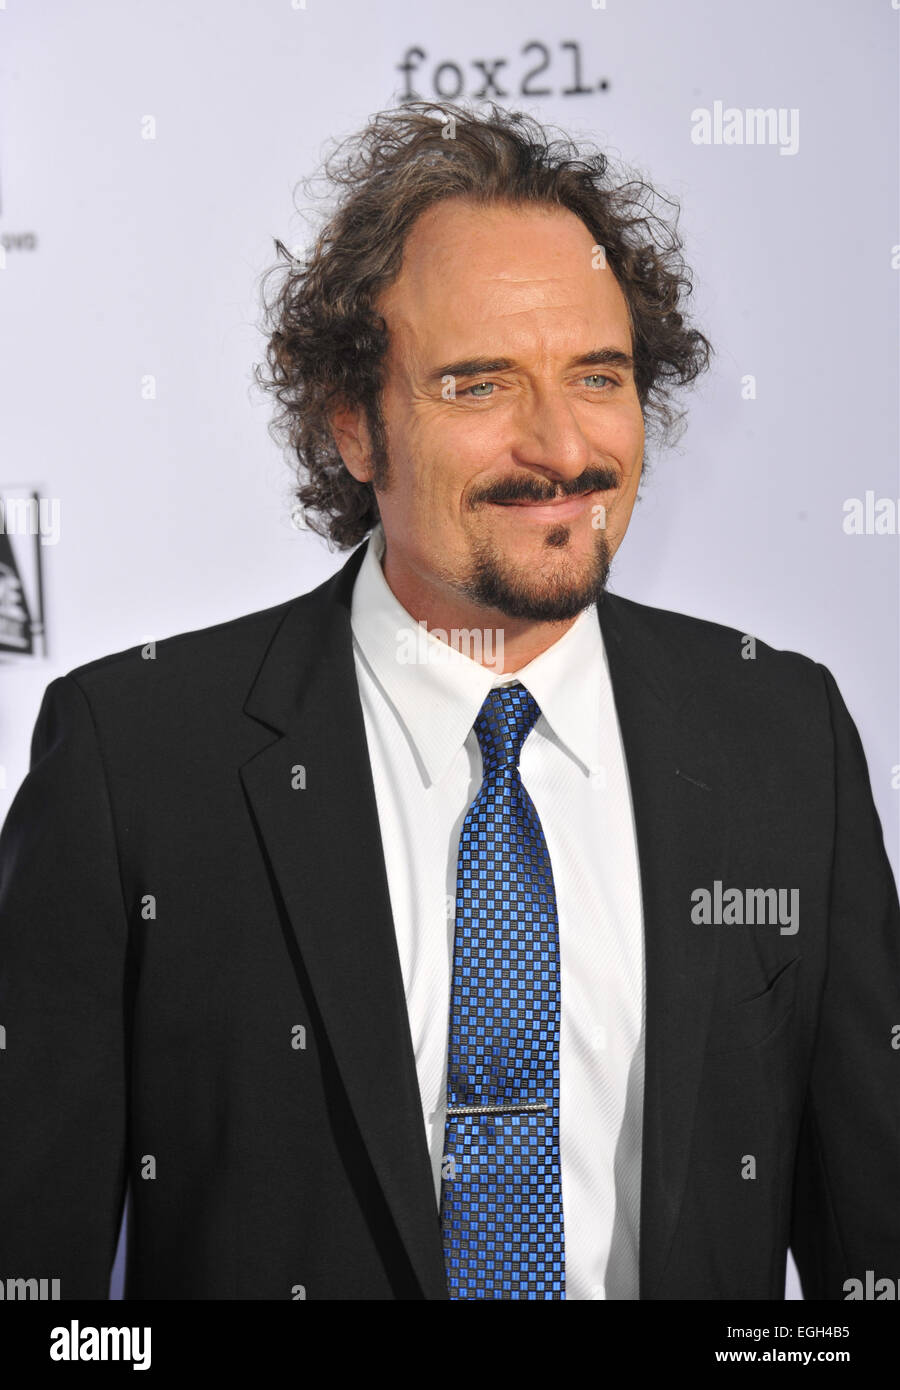 LOS ANGELES, CA - SEPTEMBER 7, 2013: Kim Coates at the season 6 premiere of 'Sons of Anarchy' at the Dolby Theatre, Hollywood. Stock Photo